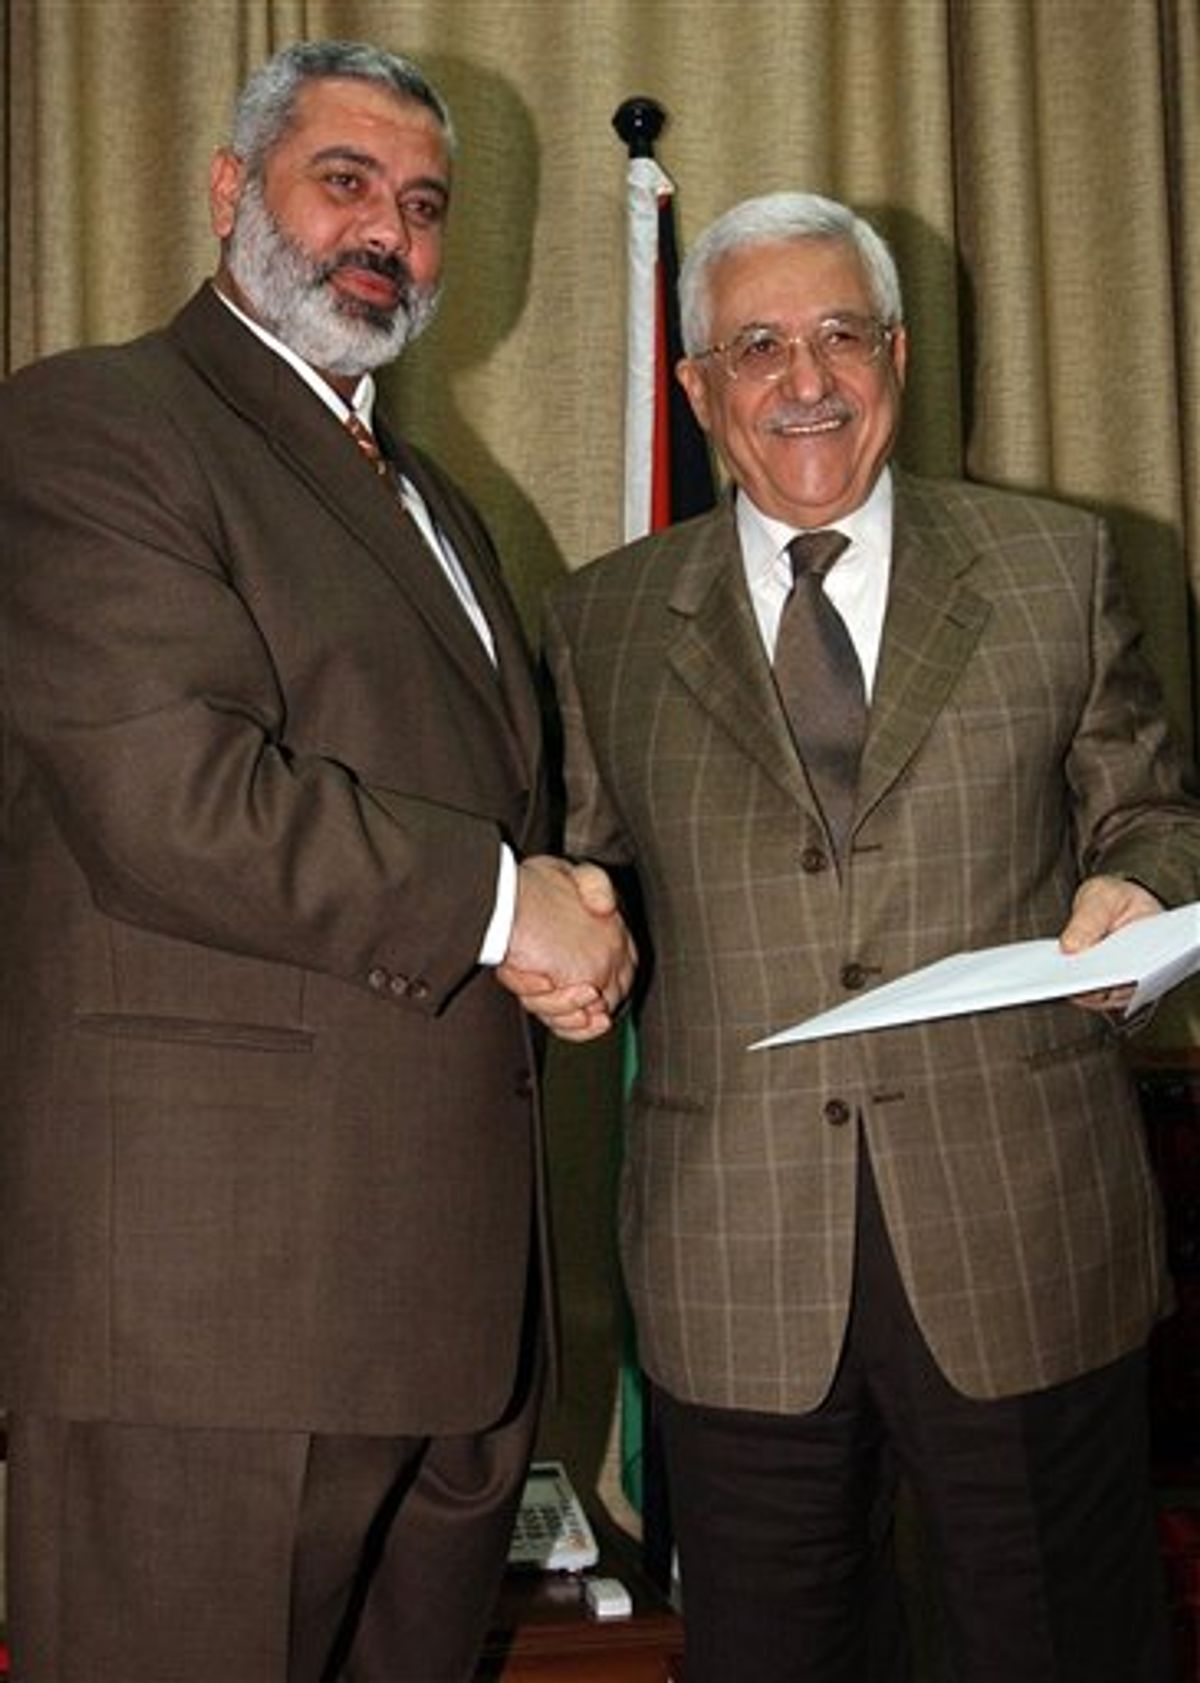 FILE - In this Sunday, March 19, 2006 file photo made available by the Palestinian Authority, the Palestinian Authority President Mahmoud Abbas, right, holds a file with the proposal for a new Palestinian Cabinet as he shakes hands with Palestinian Prime Minister Ismail Haniyeh, from the Islamic group Hamas, in Gaza City. Hamas officials said Tuesday, May 3, 2011, that the Islamic militant group would honor an unofficial truce with Israel after forming a new government with Palestinian rivals from the West Bank. (AP Photo/Abdel Alahim Abu Askar/Palestinian Authority, File)  (AP)